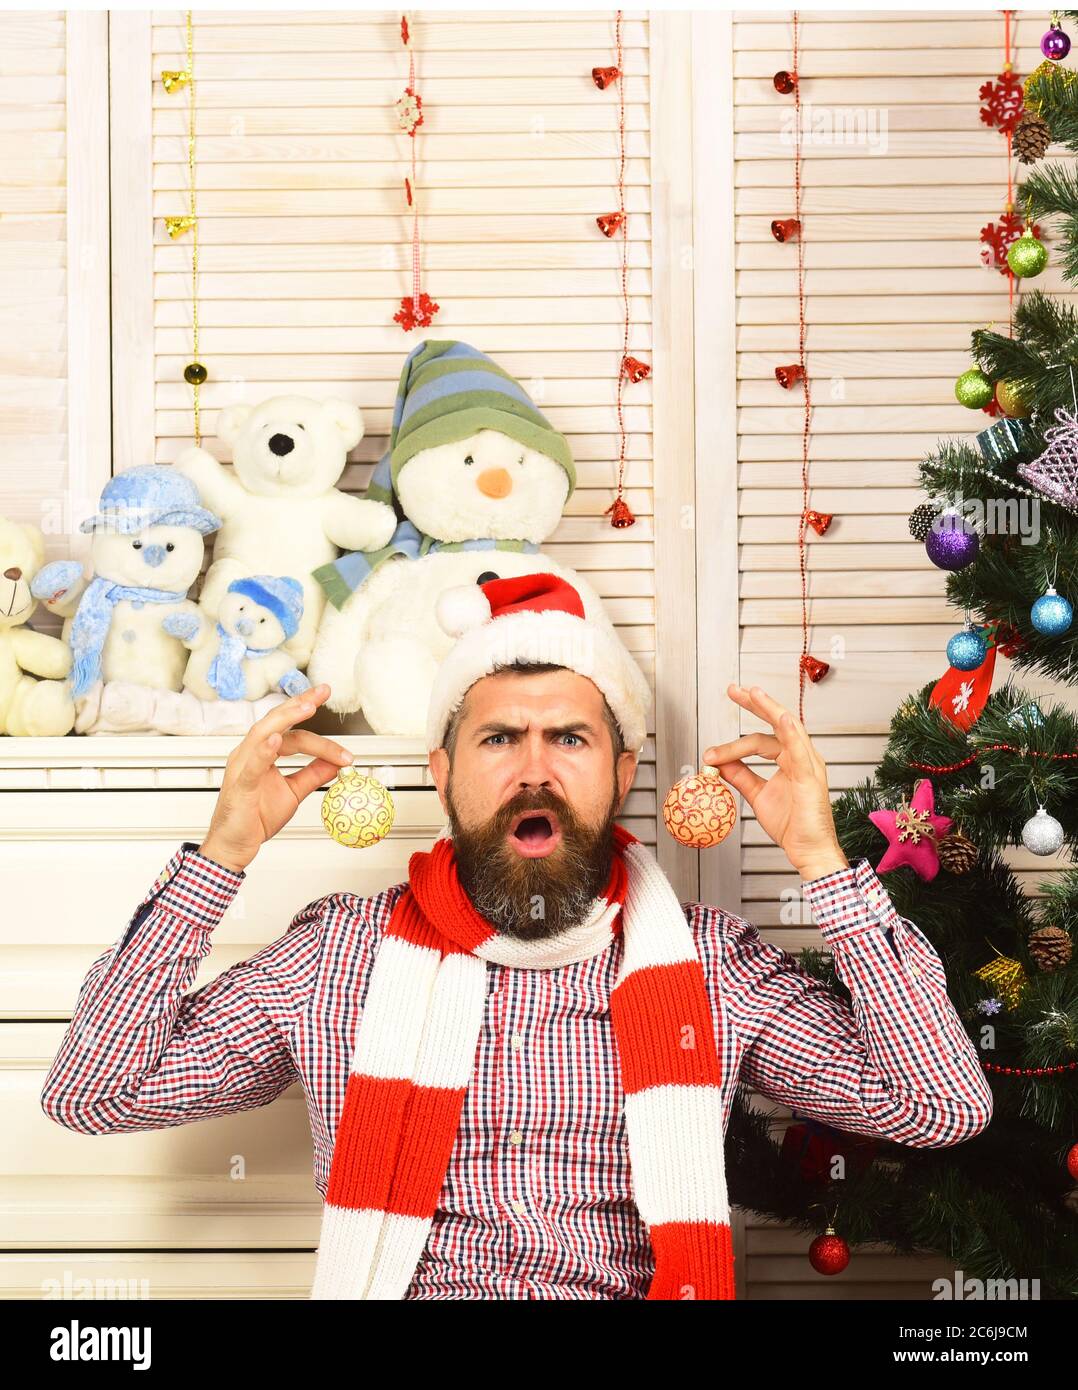 Festivals and decor concept. Santa Claus with angry face by wooden wall, bureau Christmas tree on background. Man with beard holds Christmas balls as earrings. Guy plays with fir tree decorations Stock Photo